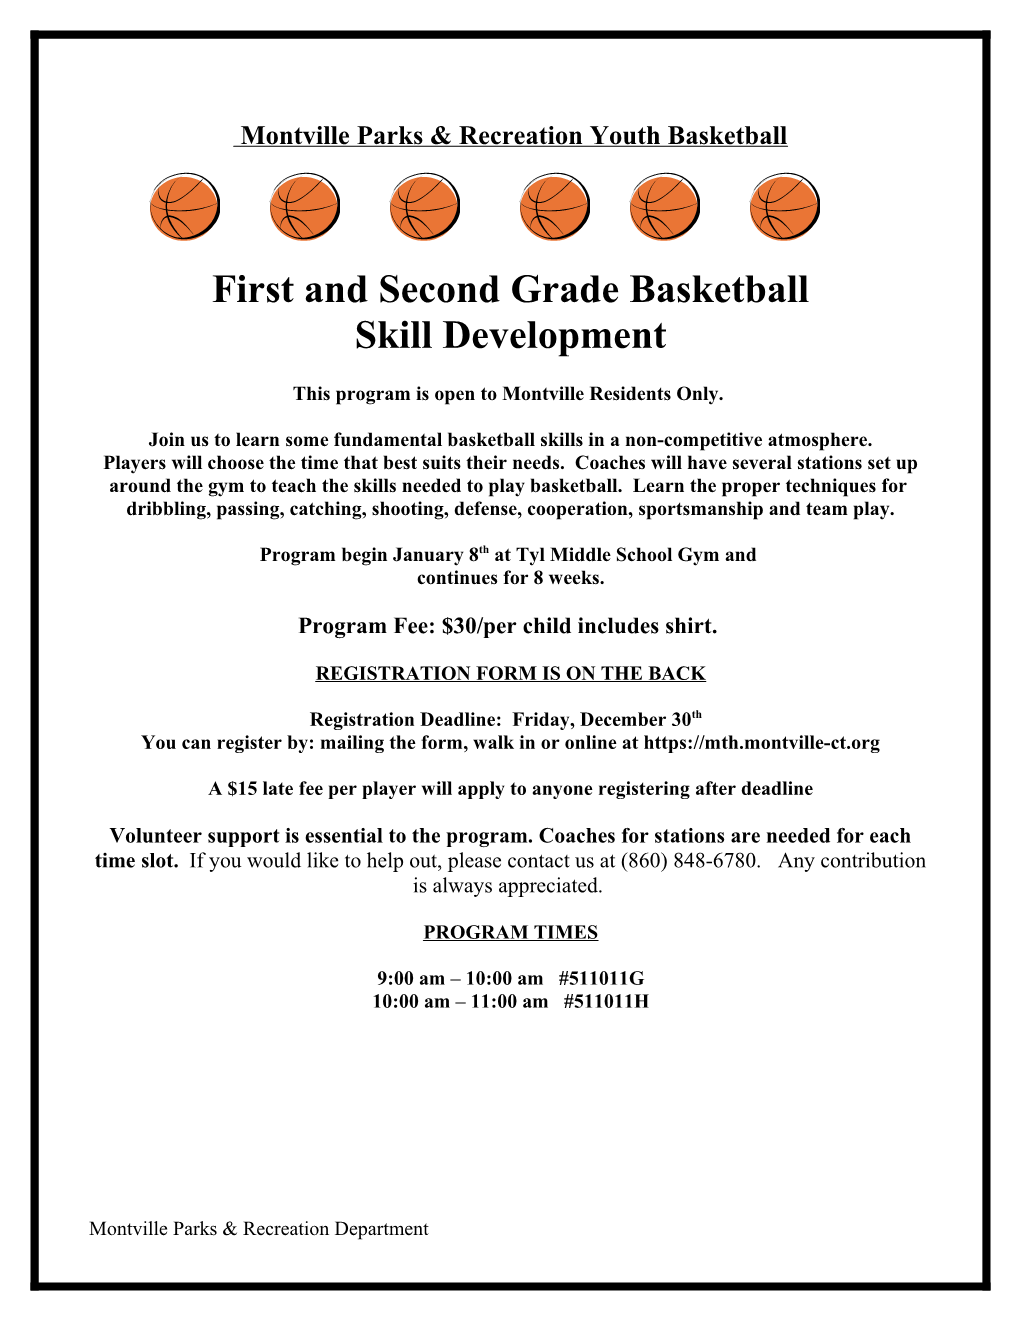 Montville Parks & Recreation Youth Basketball